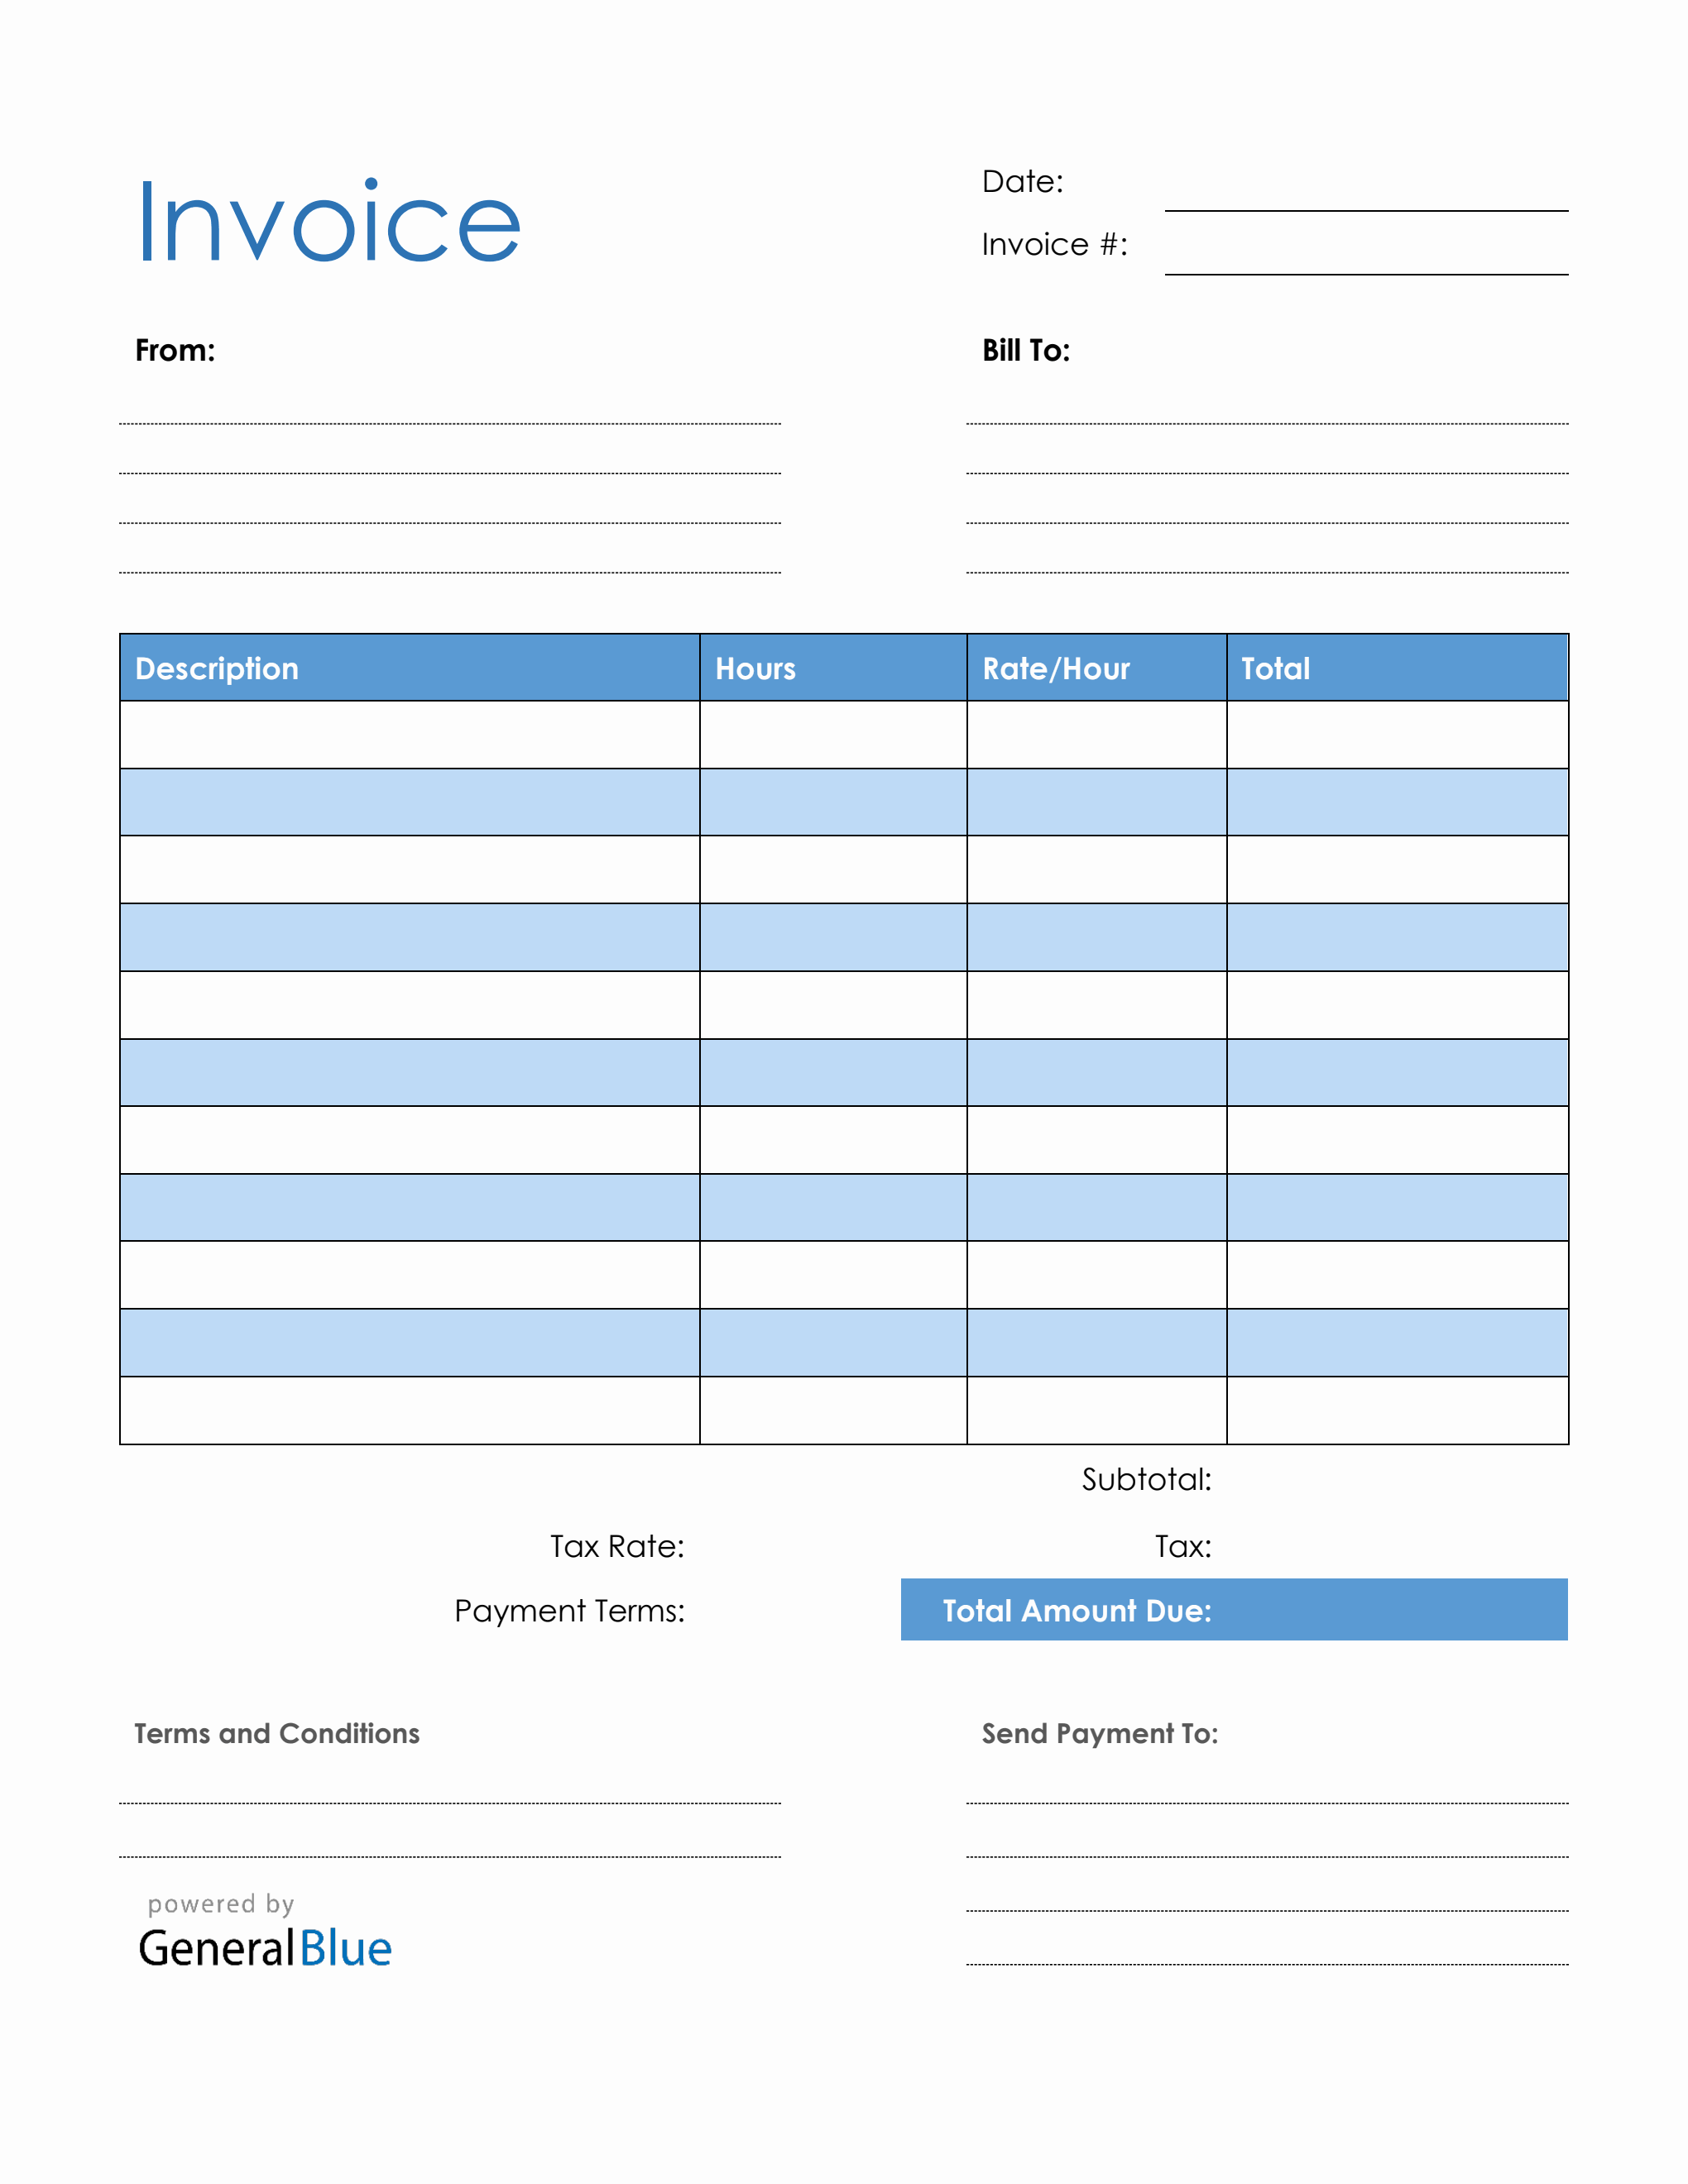 blank-invoice-template-in-pdf-blue